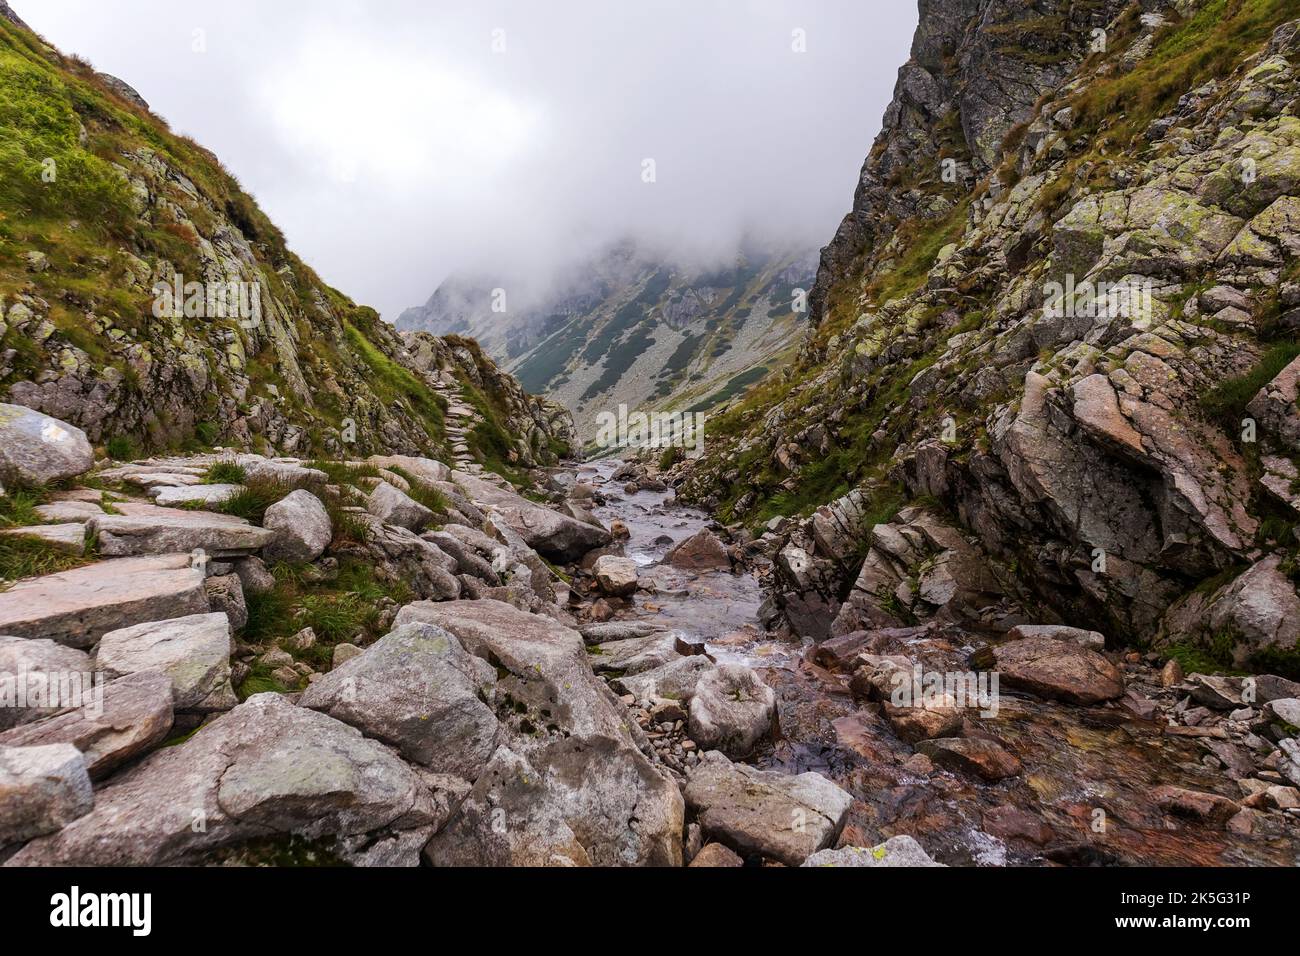 Impressive landscape with large grey-brown mountains in the Polish Tartars with a rocky hiking path Stock Photo